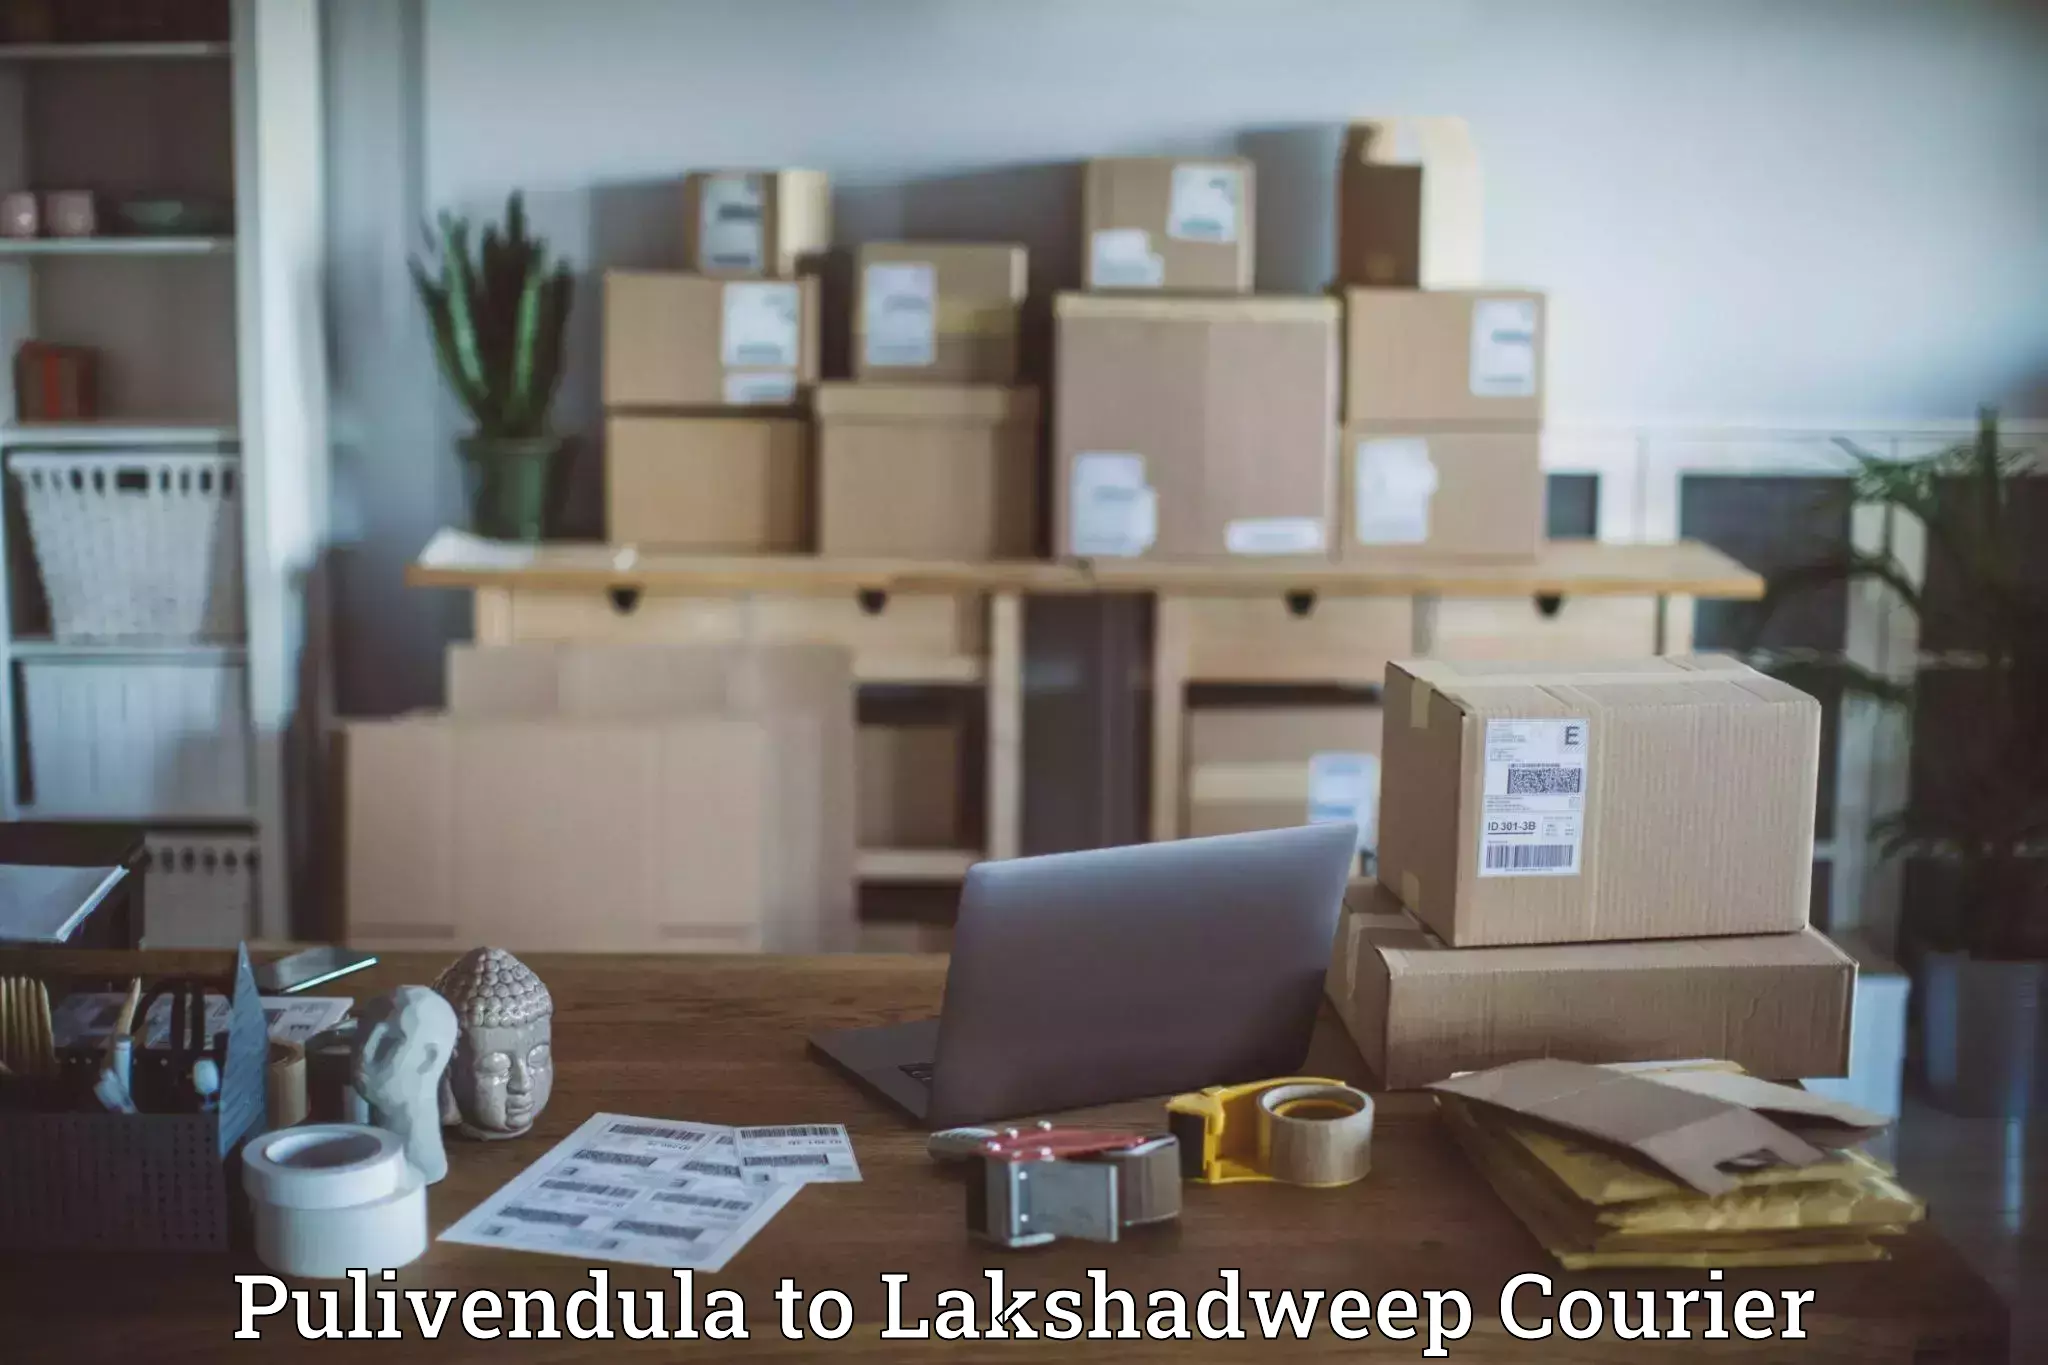 Express postal services in Pulivendula to Lakshadweep